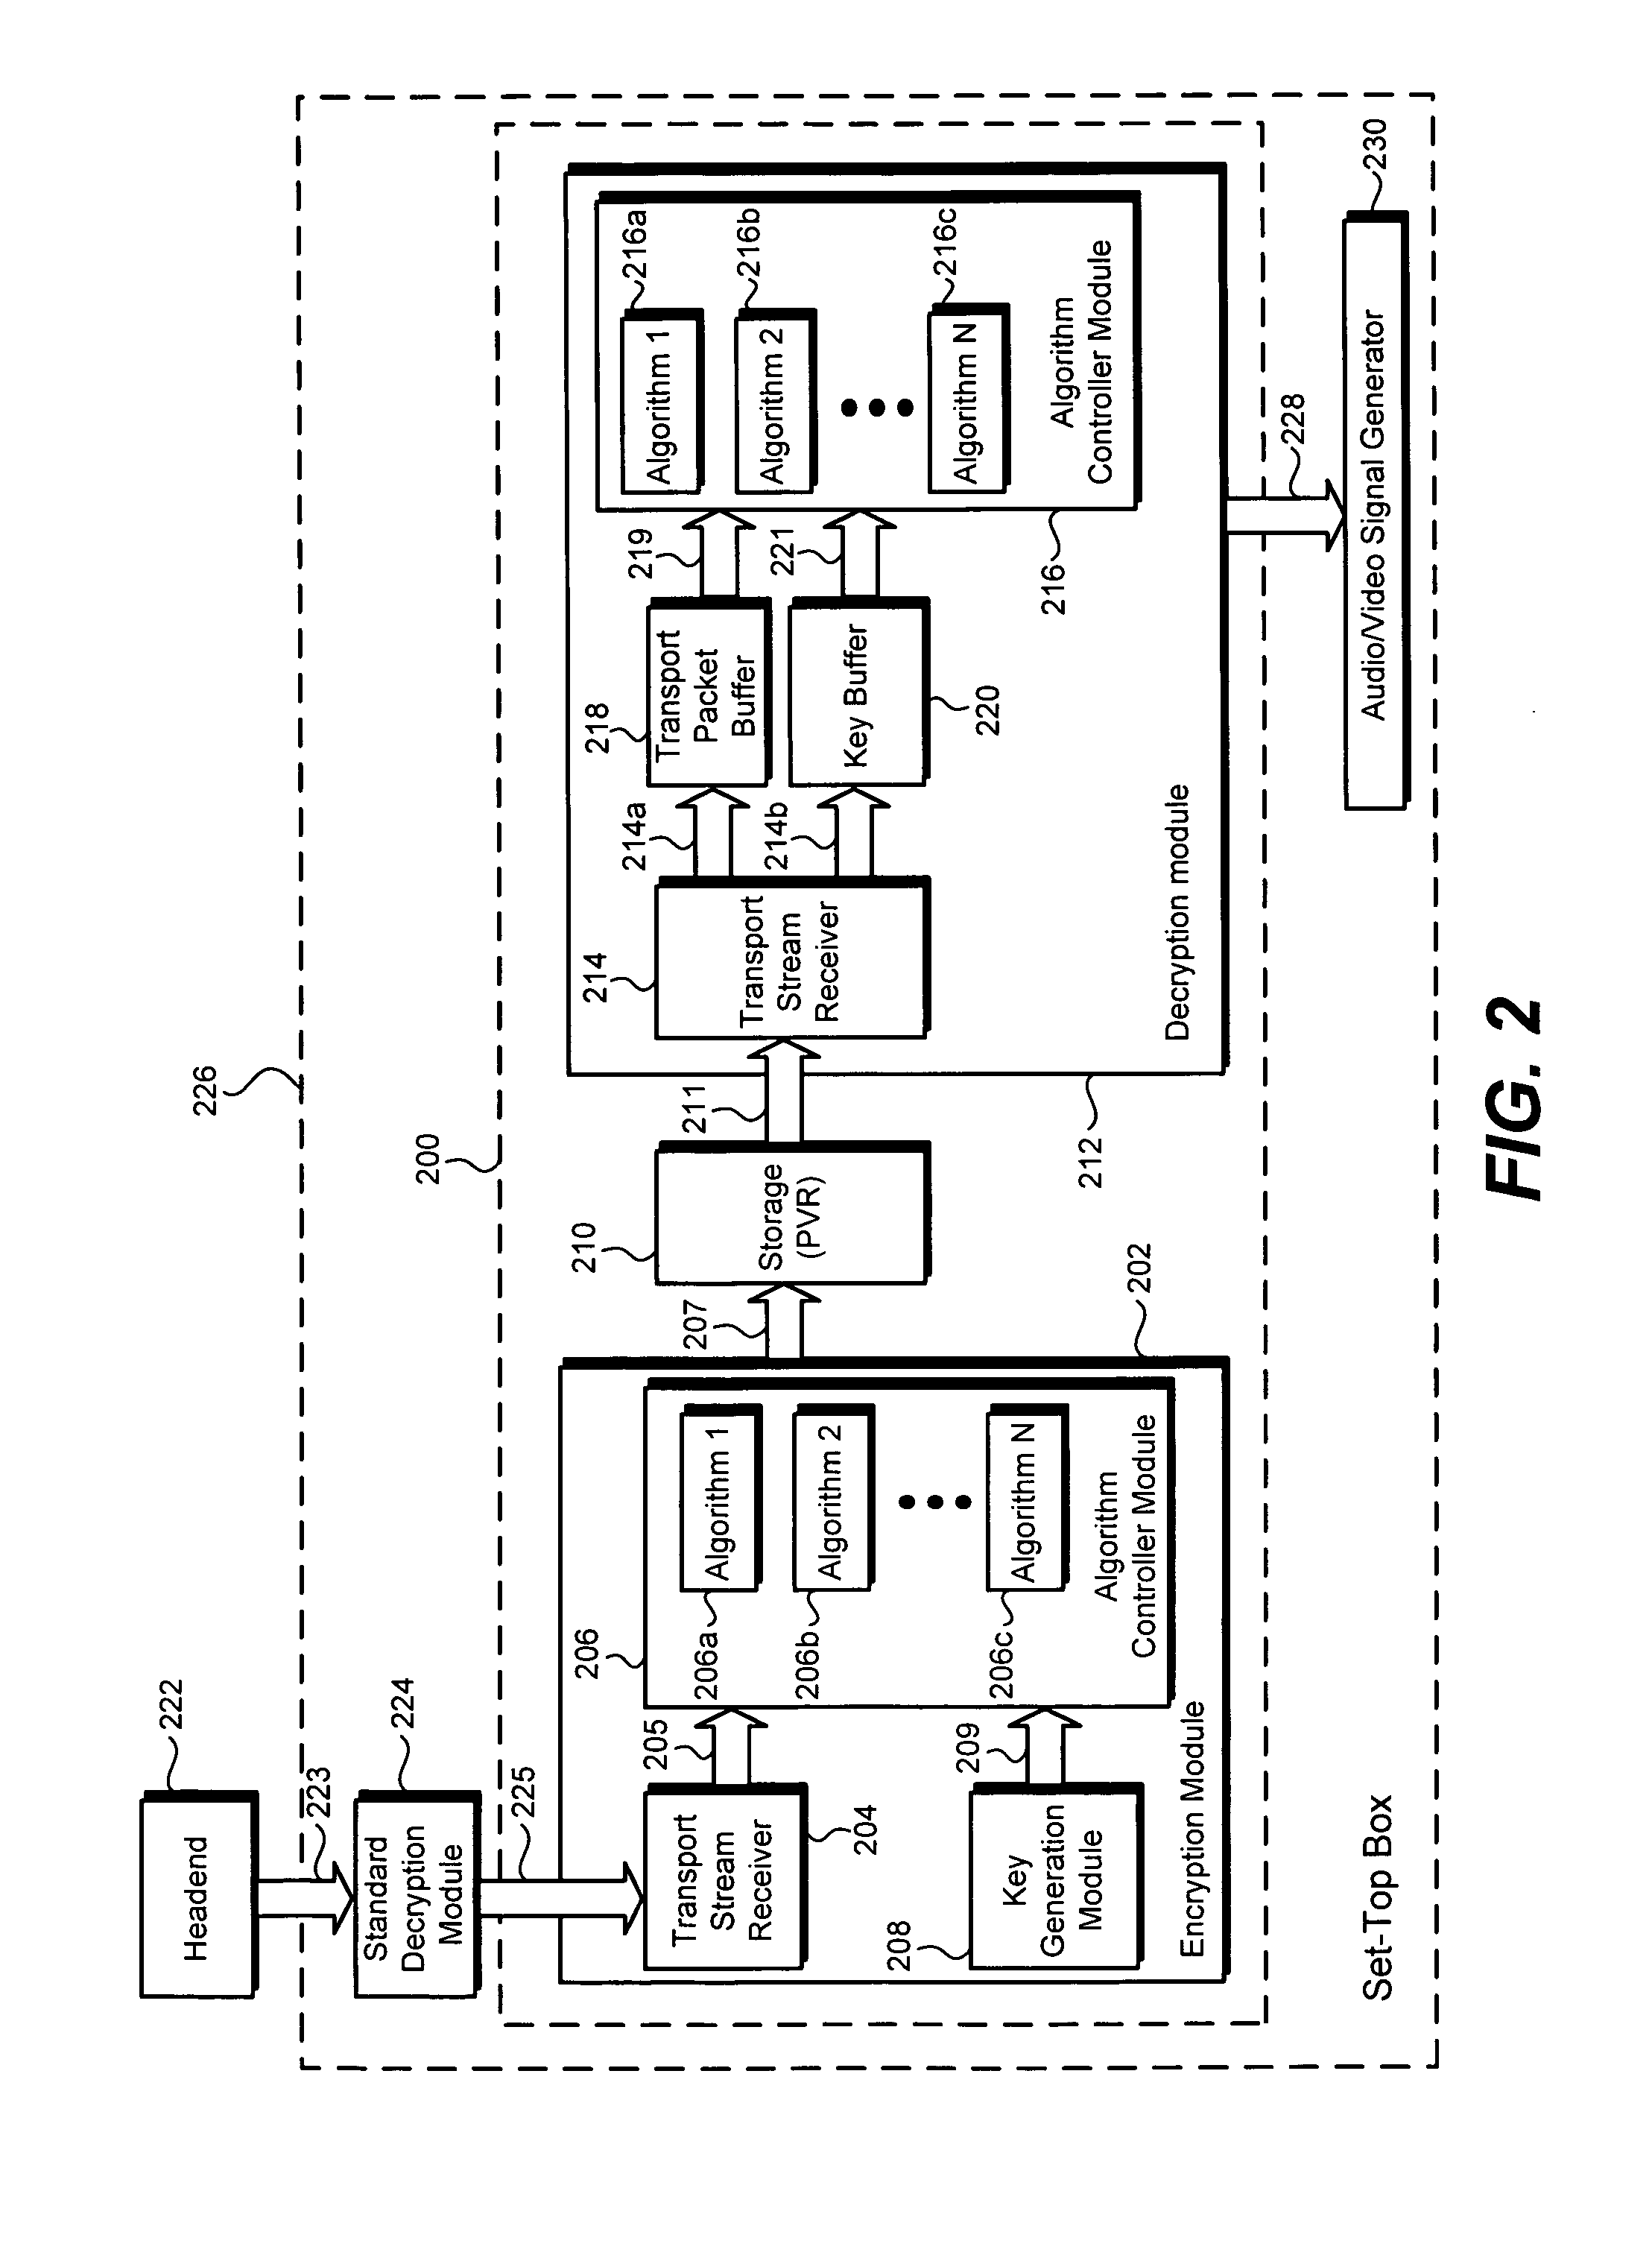 Method and system for encrypting and decrypting a transport stream using multiple algorithms